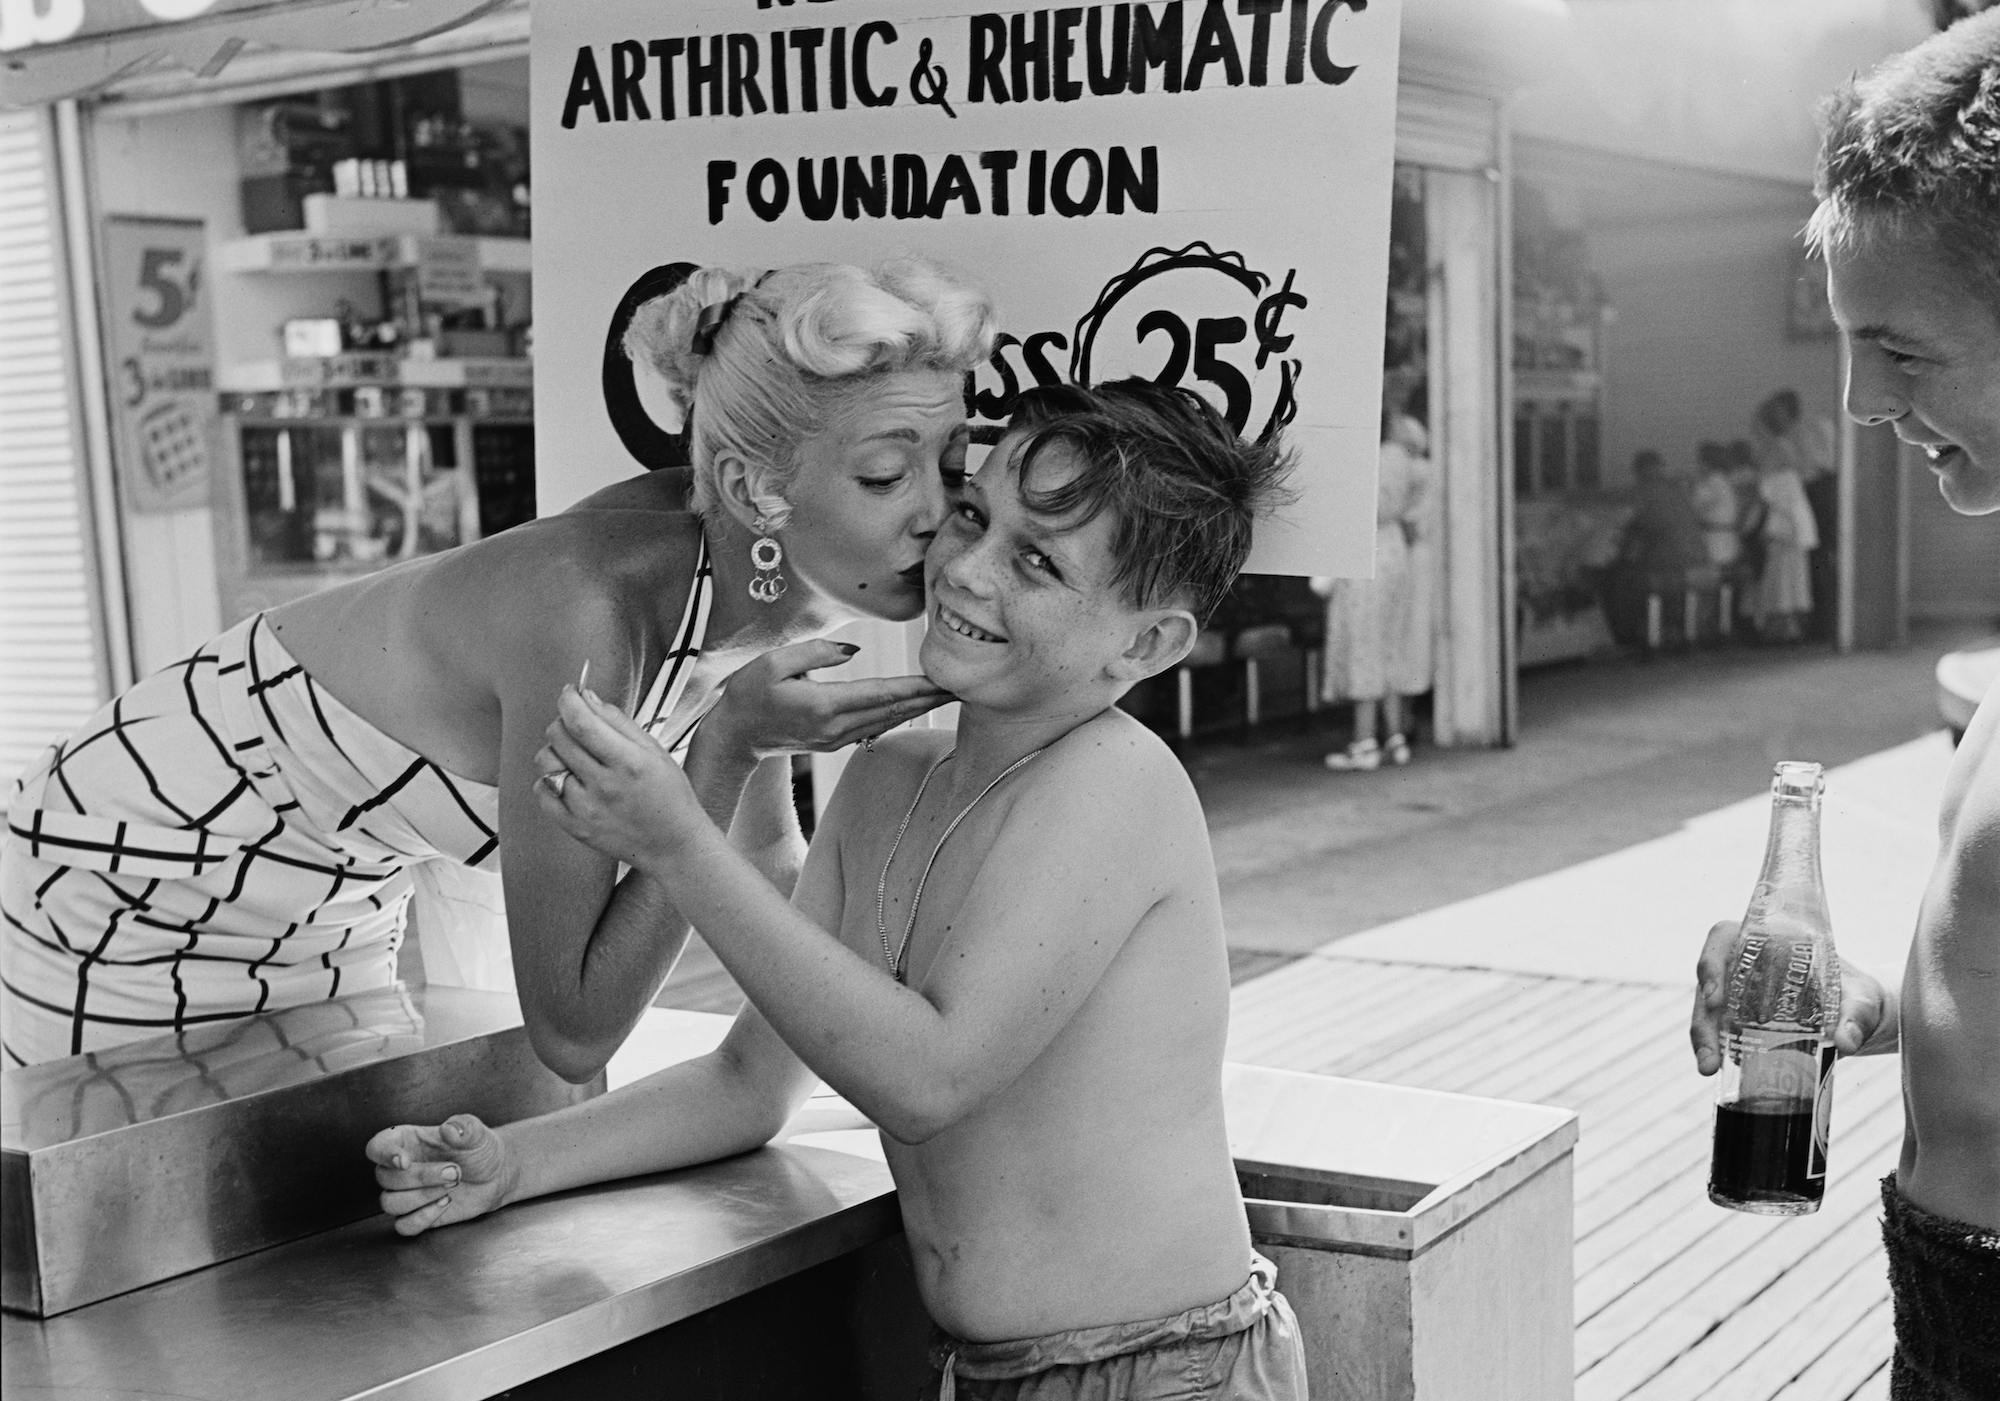 A kissing booth in aid of the New York Arthritic and Rheumatic Foundation, charging 25 cents a kiss, USA, 1953. (Photo by Carsten/Graphic House/Archive Photos/Getty Images)